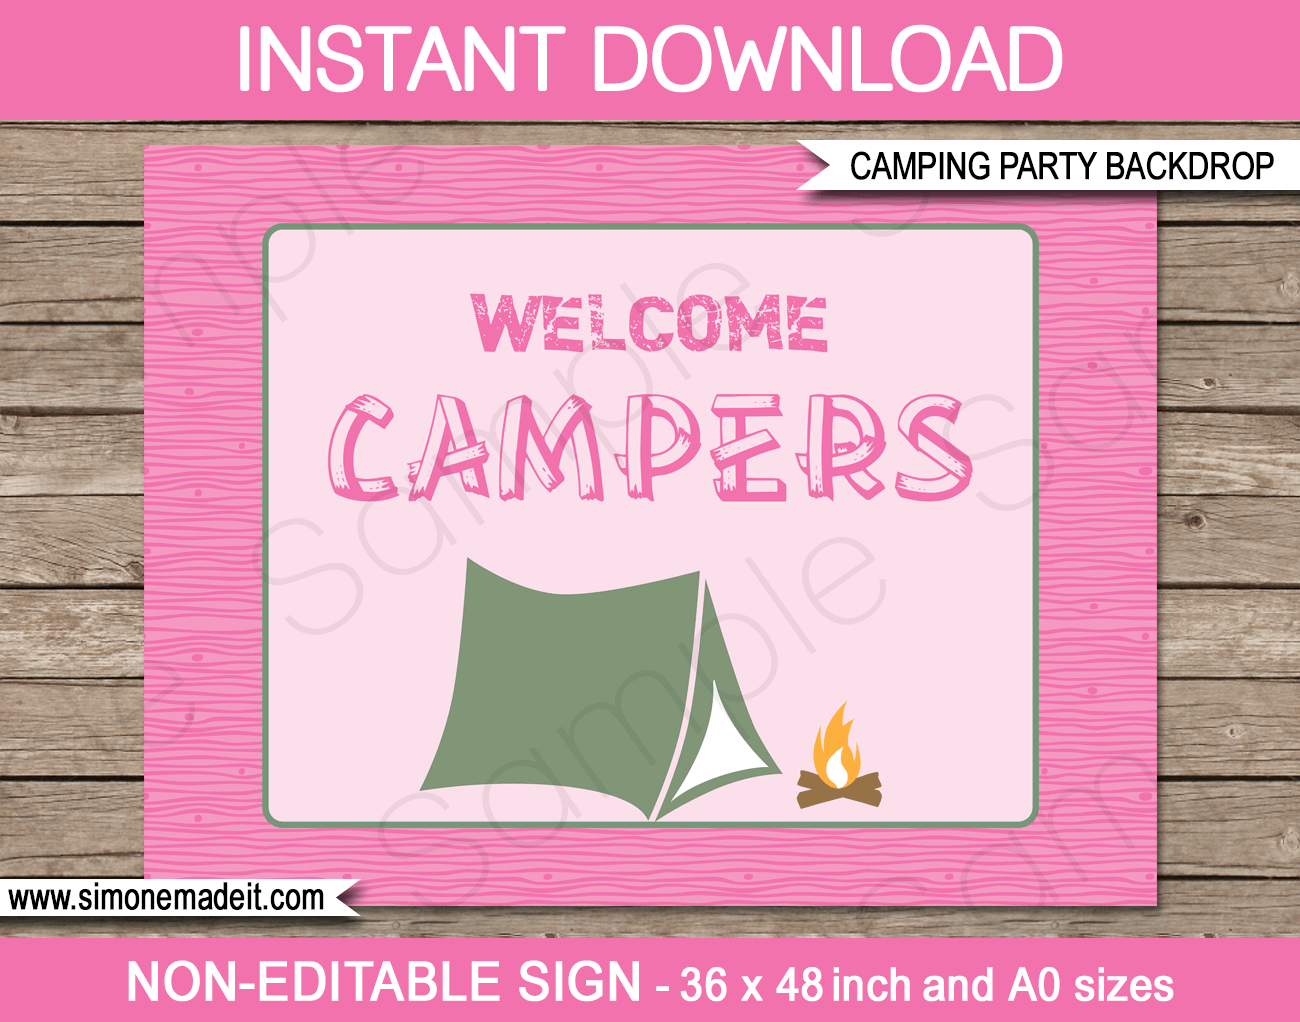 Pink Girl Camping Party Backdrop - Welcome Campers | Printable DIY Template | Party Decorations | 36x48 inches | A0 | $4.50 Instant Download via SIMONEmadeit.com